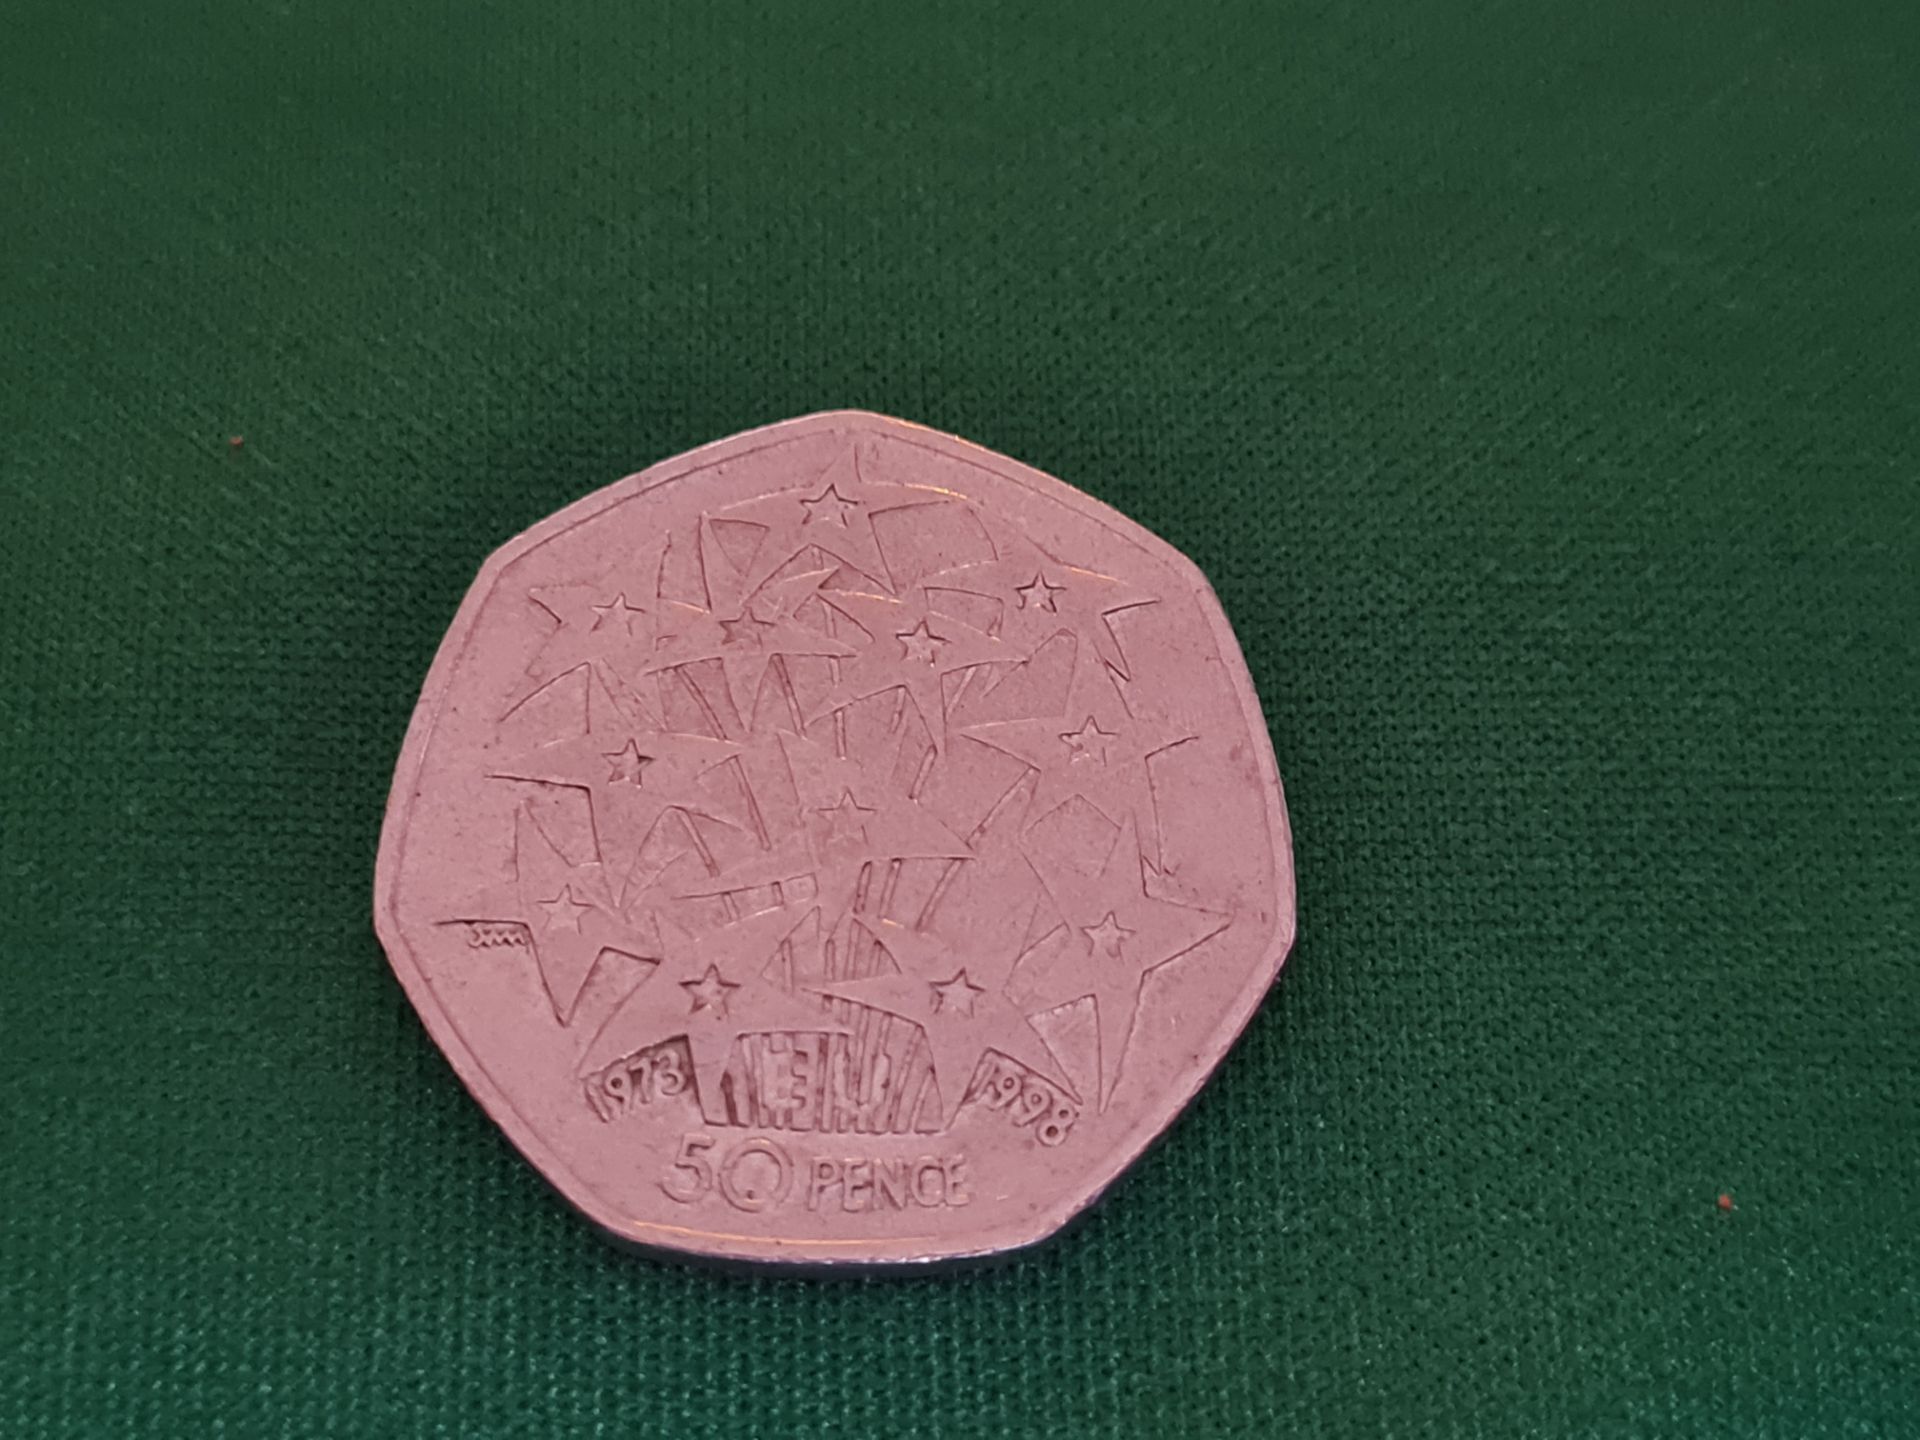 Collecters 50 p coin